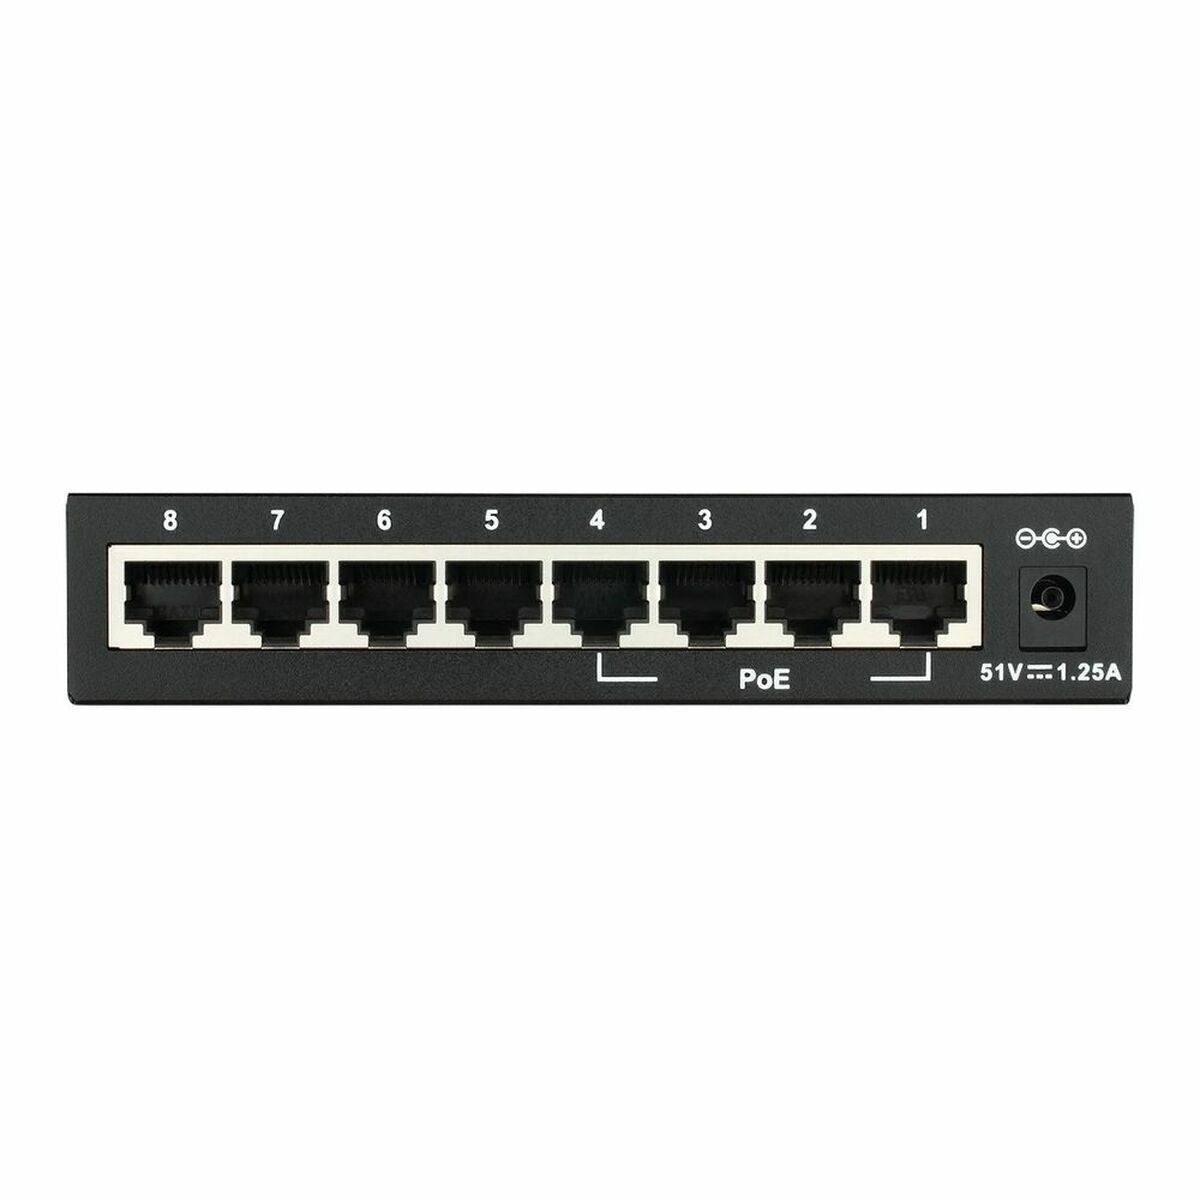 Switch D-Link DES-1008PA, D-Link, Computing, Network devices, switch-d-link-des-1008pa, Brand_D-Link, category-reference-2609, category-reference-2803, category-reference-2827, category-reference-t-19685, category-reference-t-19914, Condition_NEW, networks/wiring, Price_100 - 200, Teleworking, RiotNook